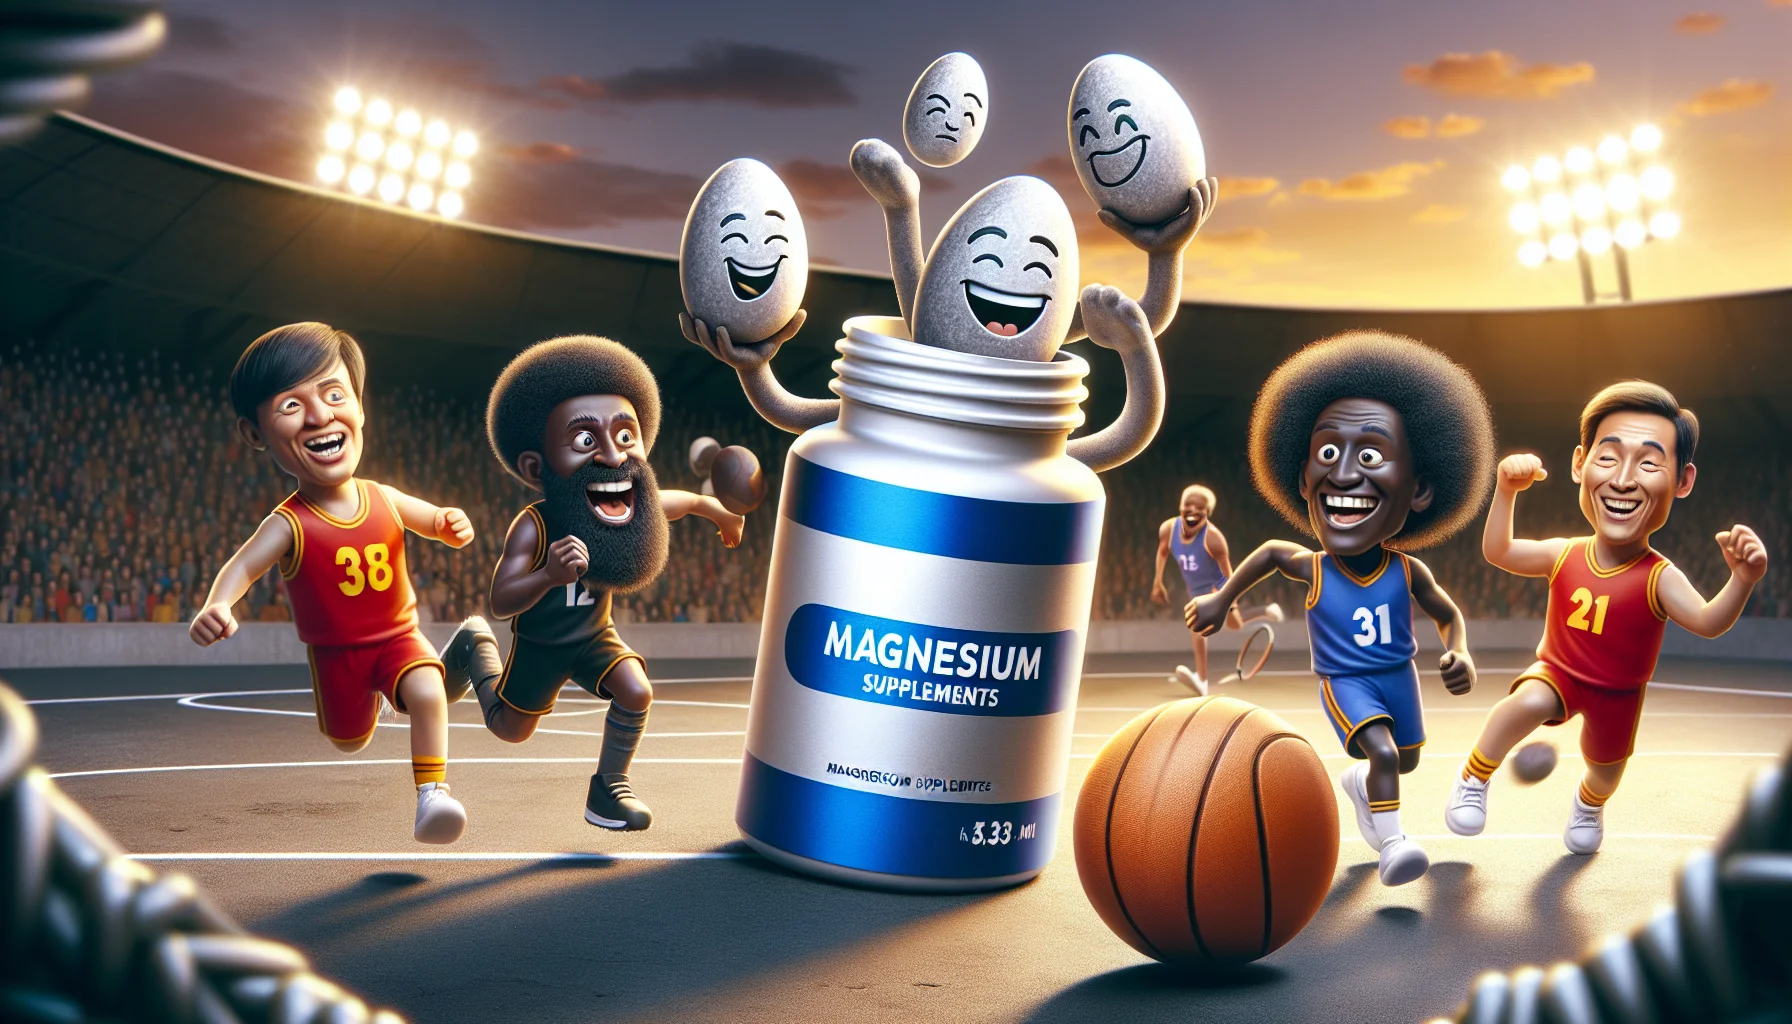 Show a comedic scene featuring a bottle of magnesium supplements, label removed, in a sports environment. Perhaps some of the supplements are anthropomorphized, with smiles on their faces, encouraging an enthusiastic football player of South Asian descent. Likewise, a basketball player of Black descent, and volleyball player of Caucasian descent are laughing and joining in the fun. The setting sun casts a golden glow over an action-packed game. The scene illustrates humorously how these supplements are essential for the athletes' sport activities.